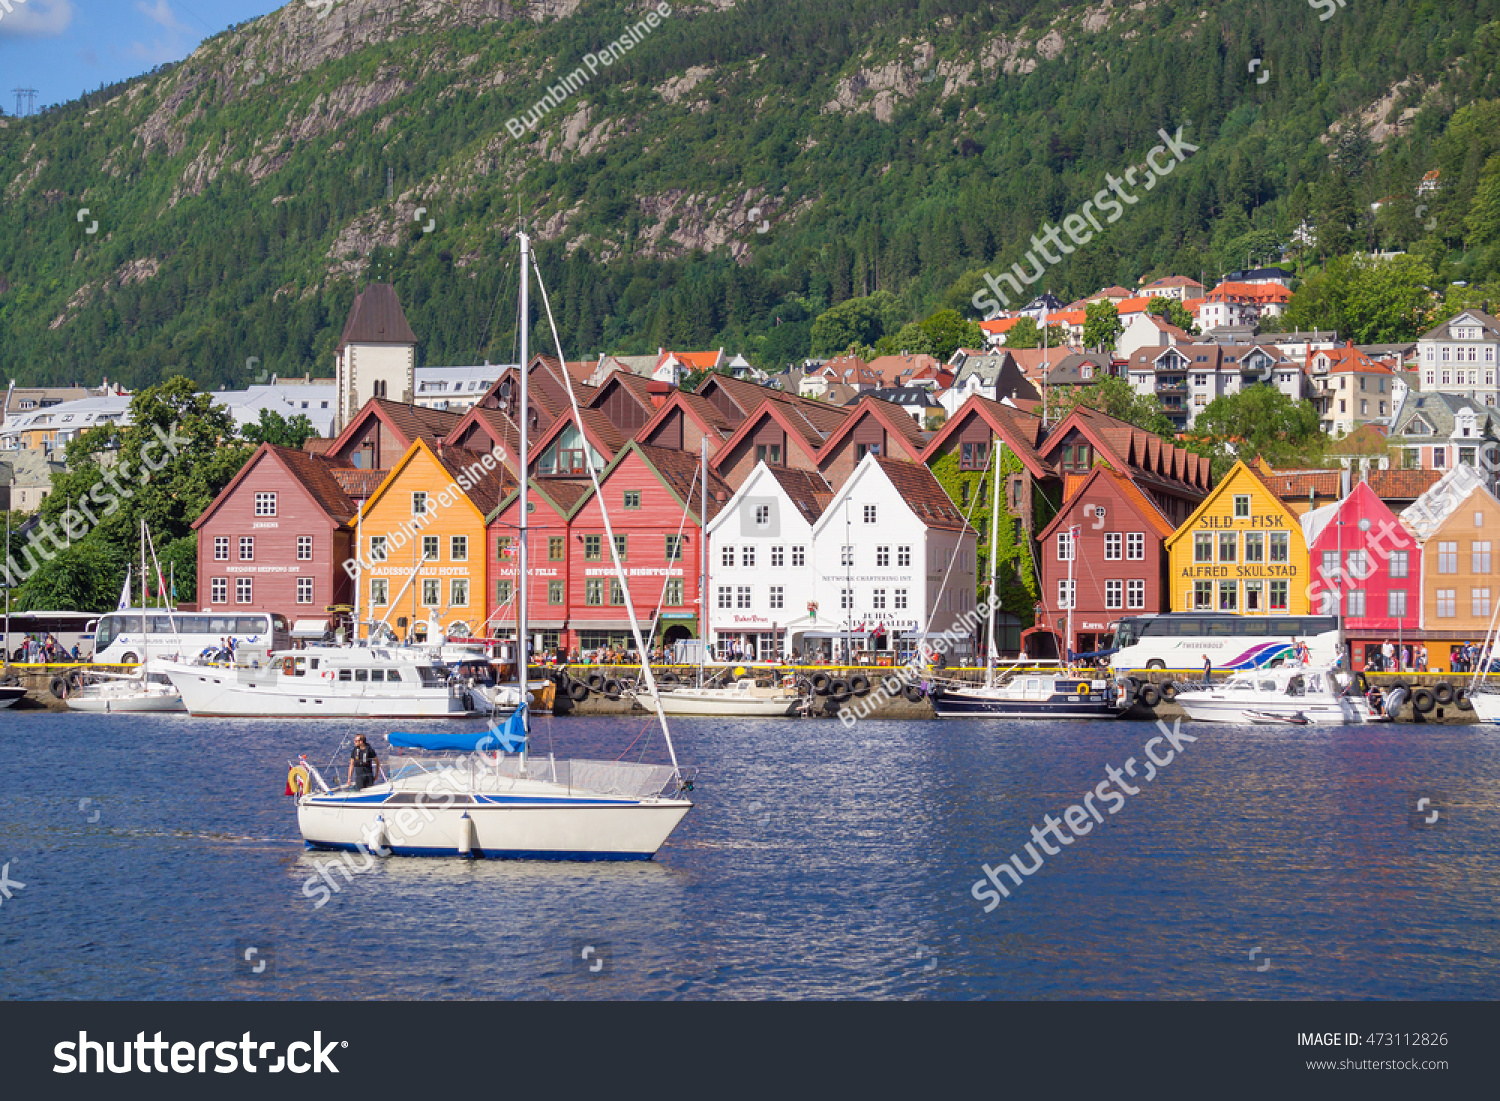 Bergen,Norway - July 20, 2016 : View of Bryggen, a series of Hanseatic commercial buildings lining the eastern side of the fjord coming into Bergen, Norway #473112826